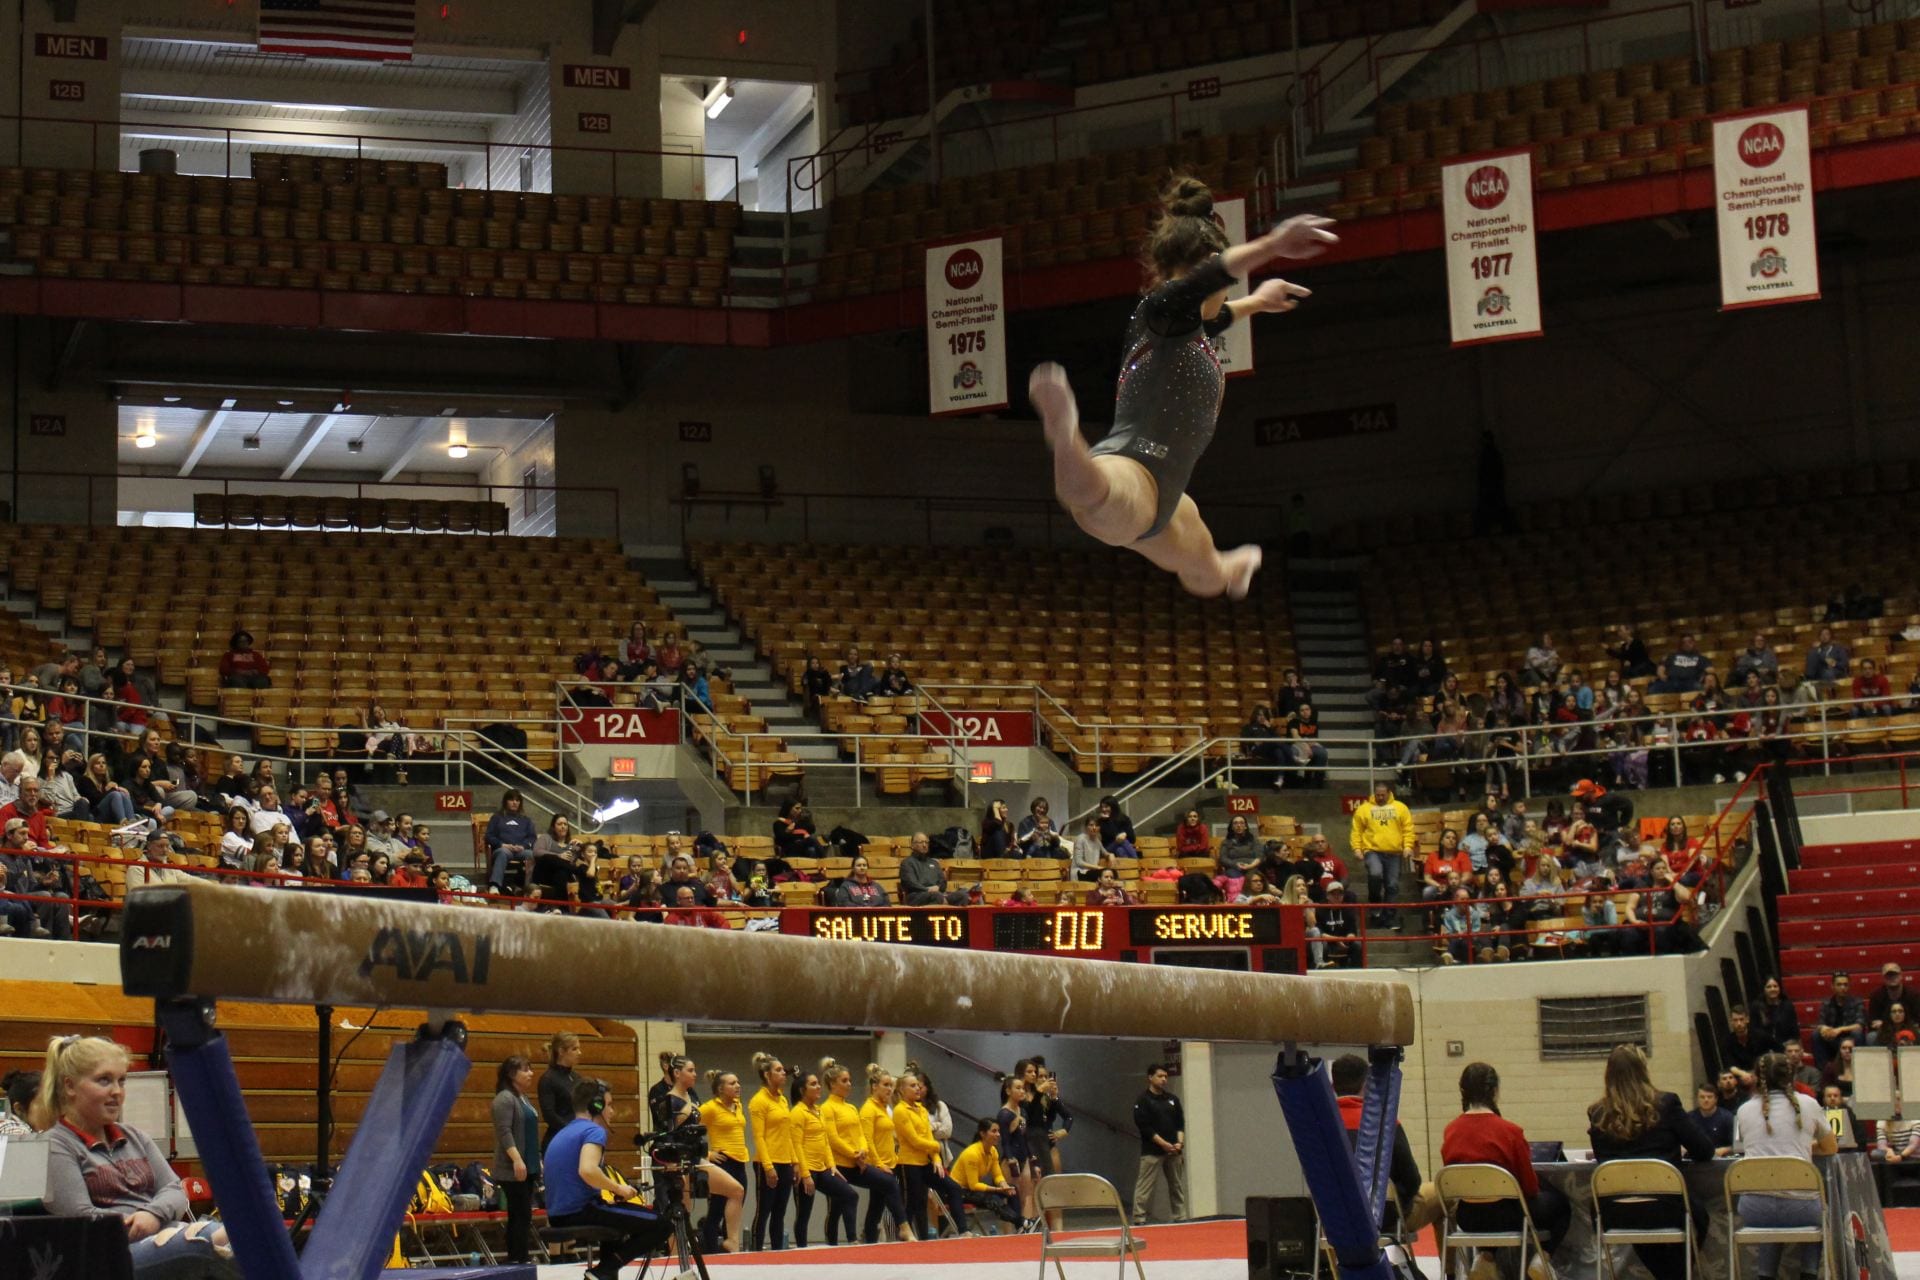 Then-sophomore Morgan Lowe hits a side leap during her balance beam routine at the Ohio State women’s gymnastics meet against West Virginia University and Temple University in St. John Arena on March 2, 2019